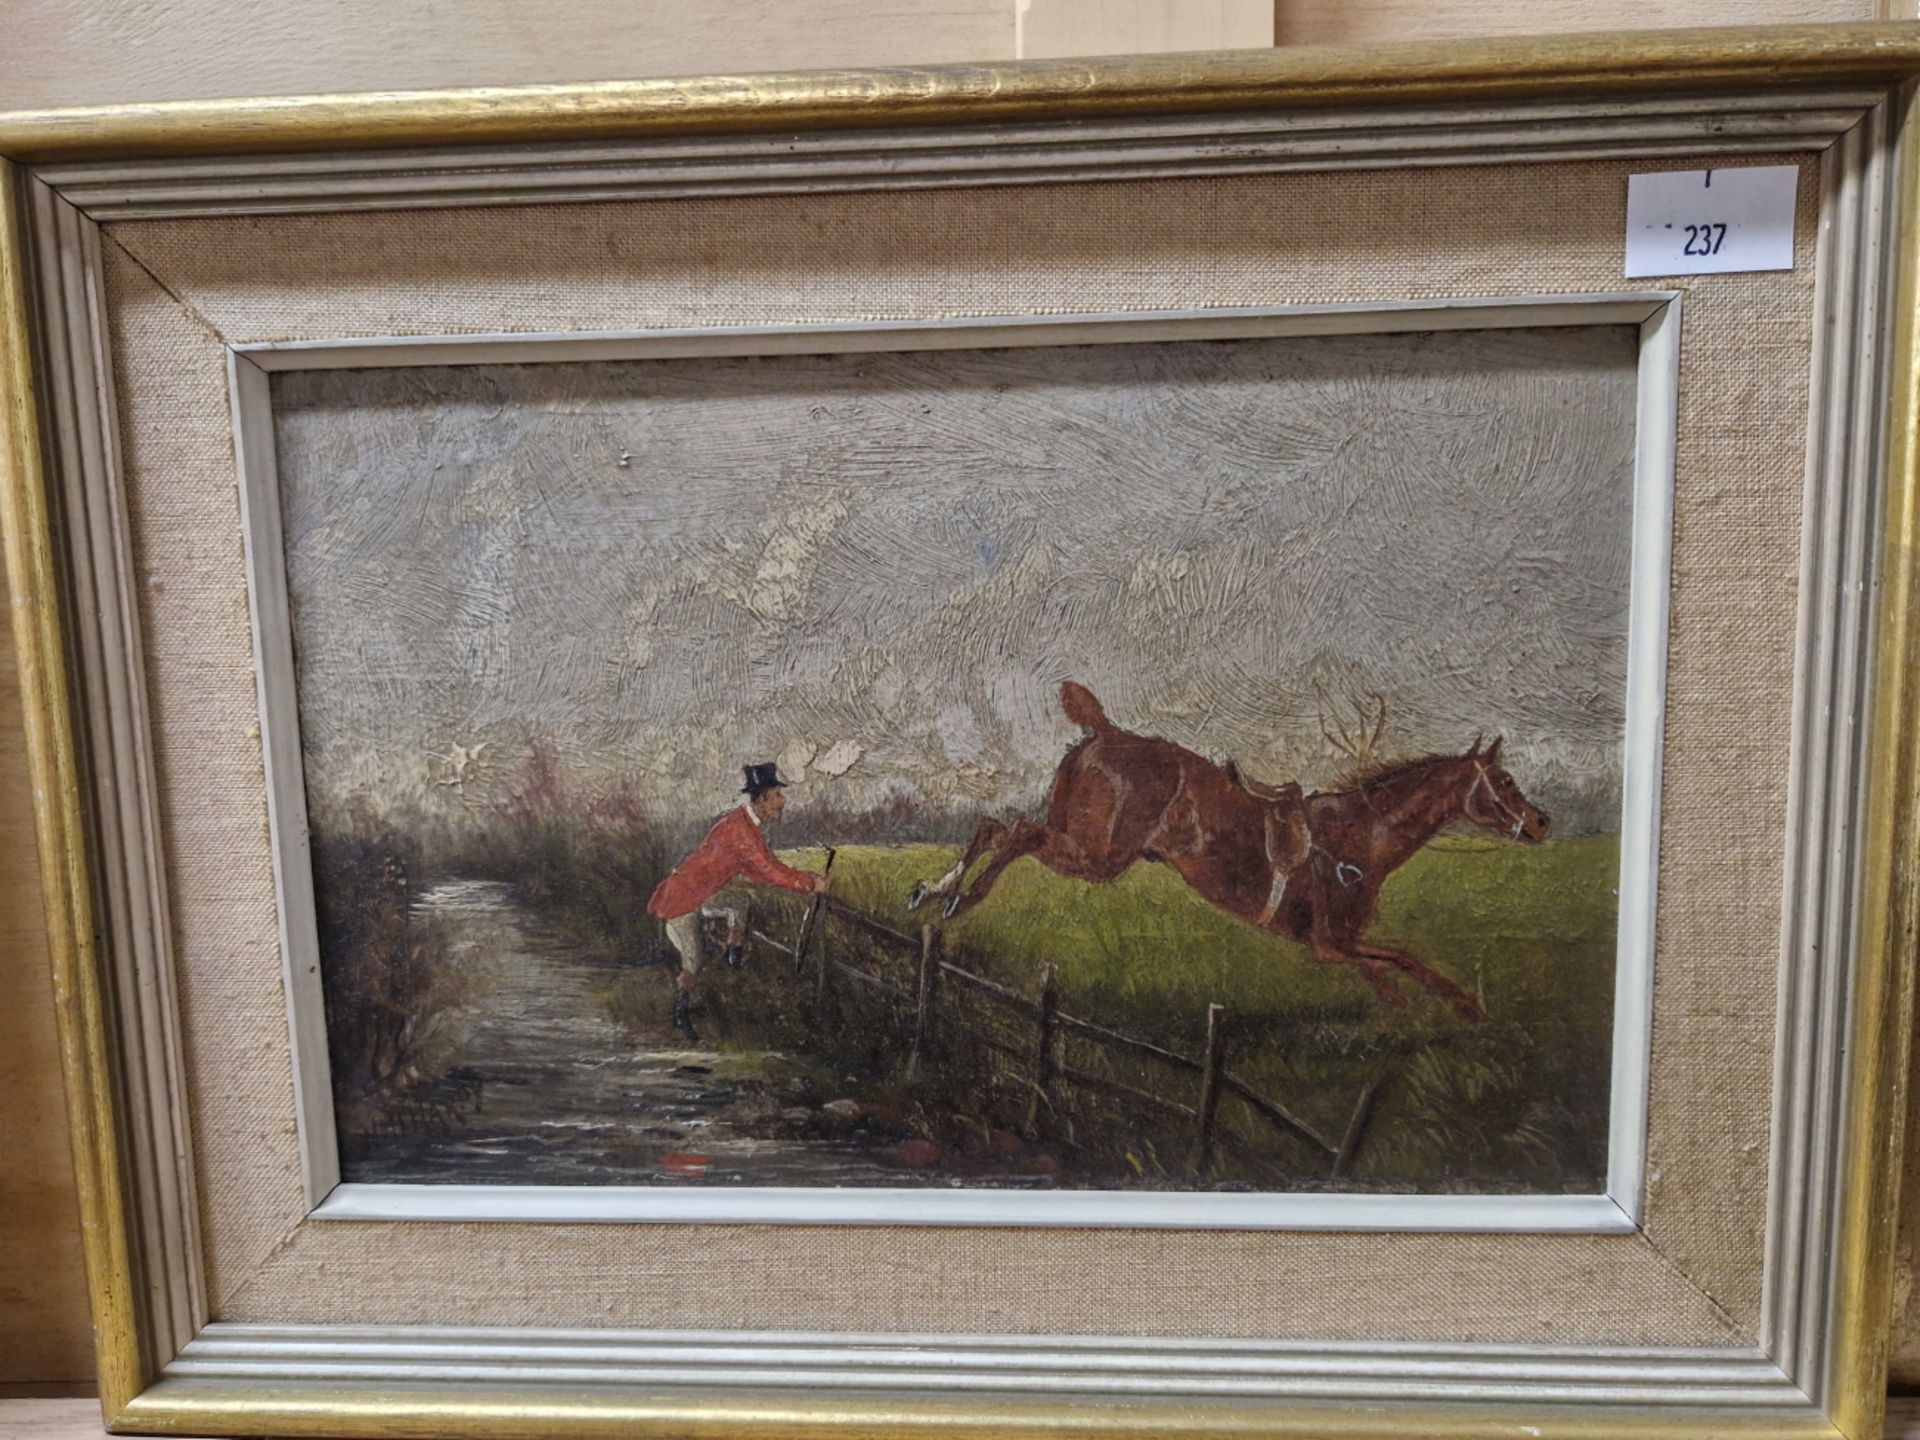 W. R. HARDY (19th/20th ENGLISH SCHOOL) TWO COMIC EQUESTRIAN SCENES, SIGNED, OIL ON BOARD. 16 x 25cms - Image 4 of 6